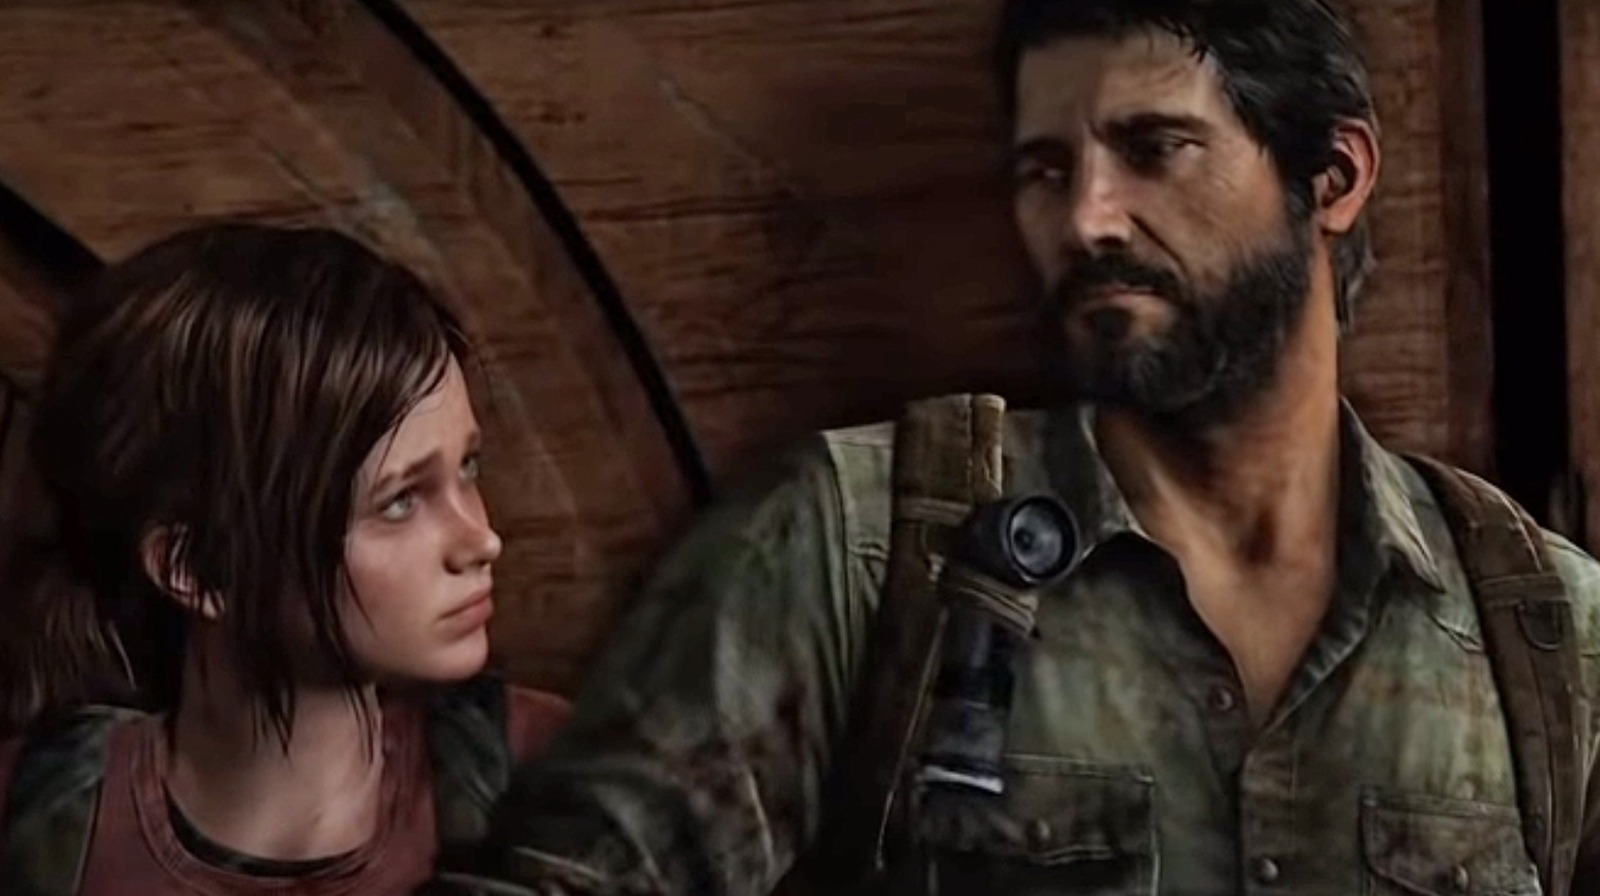 The Last Of Us TV series photo offers FIRST LOOK at Pedro Pascal and Bella  Ramsey as Joel and Ellie